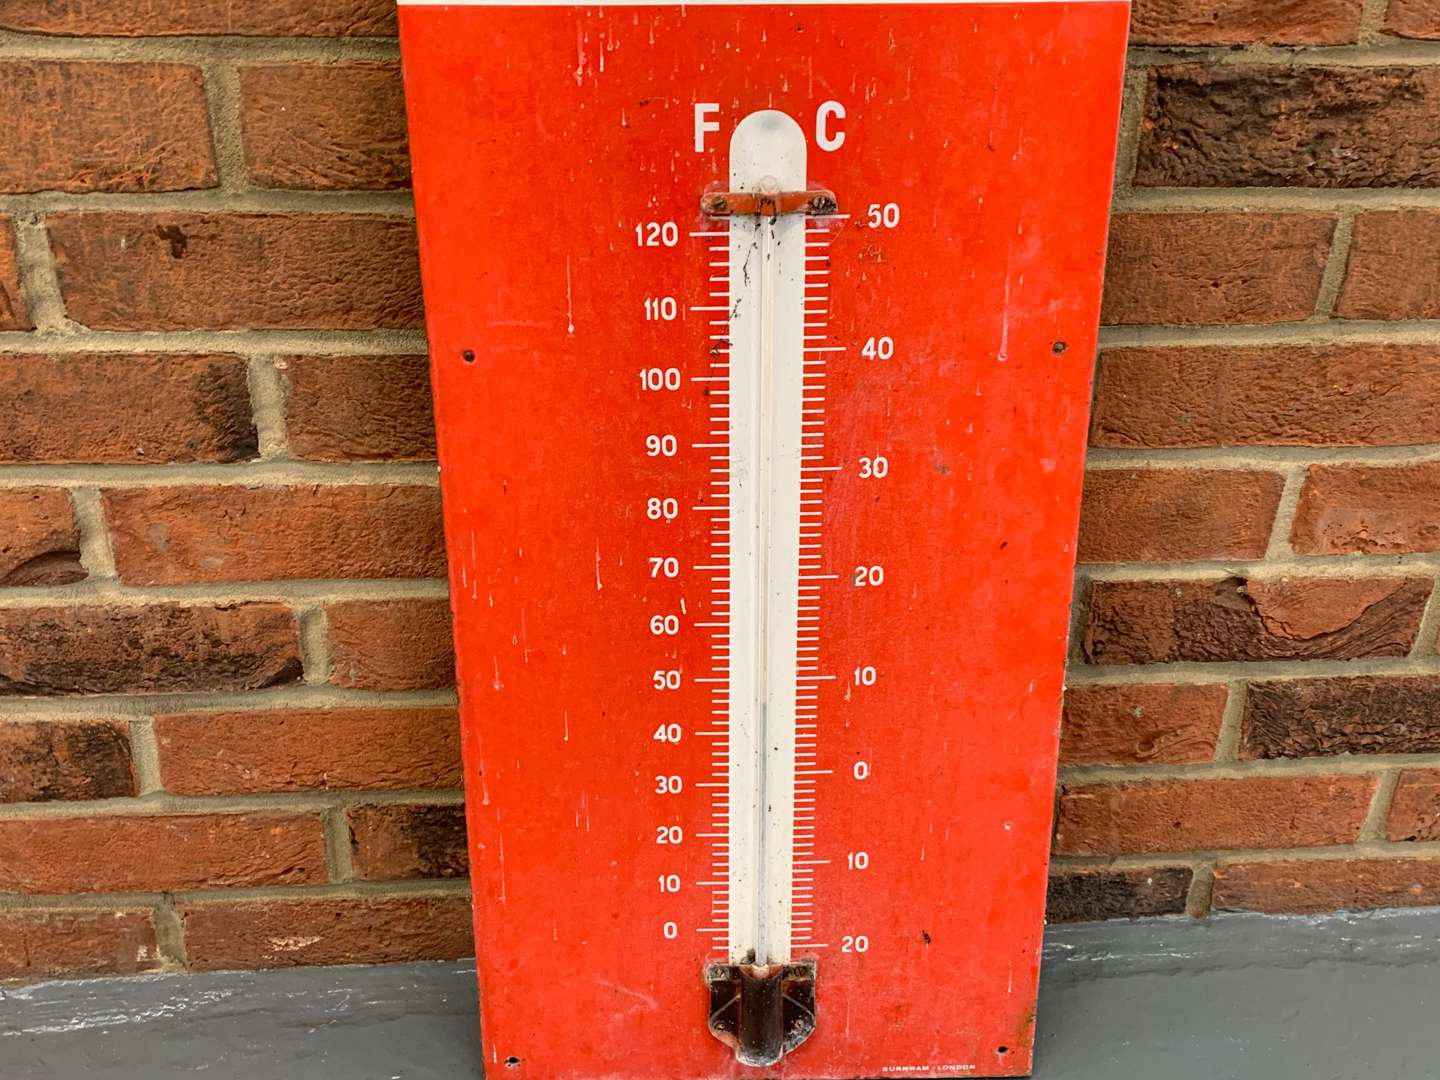 <p>Enamel “Fit Fisk Tyres” Thermometer Sign</p>